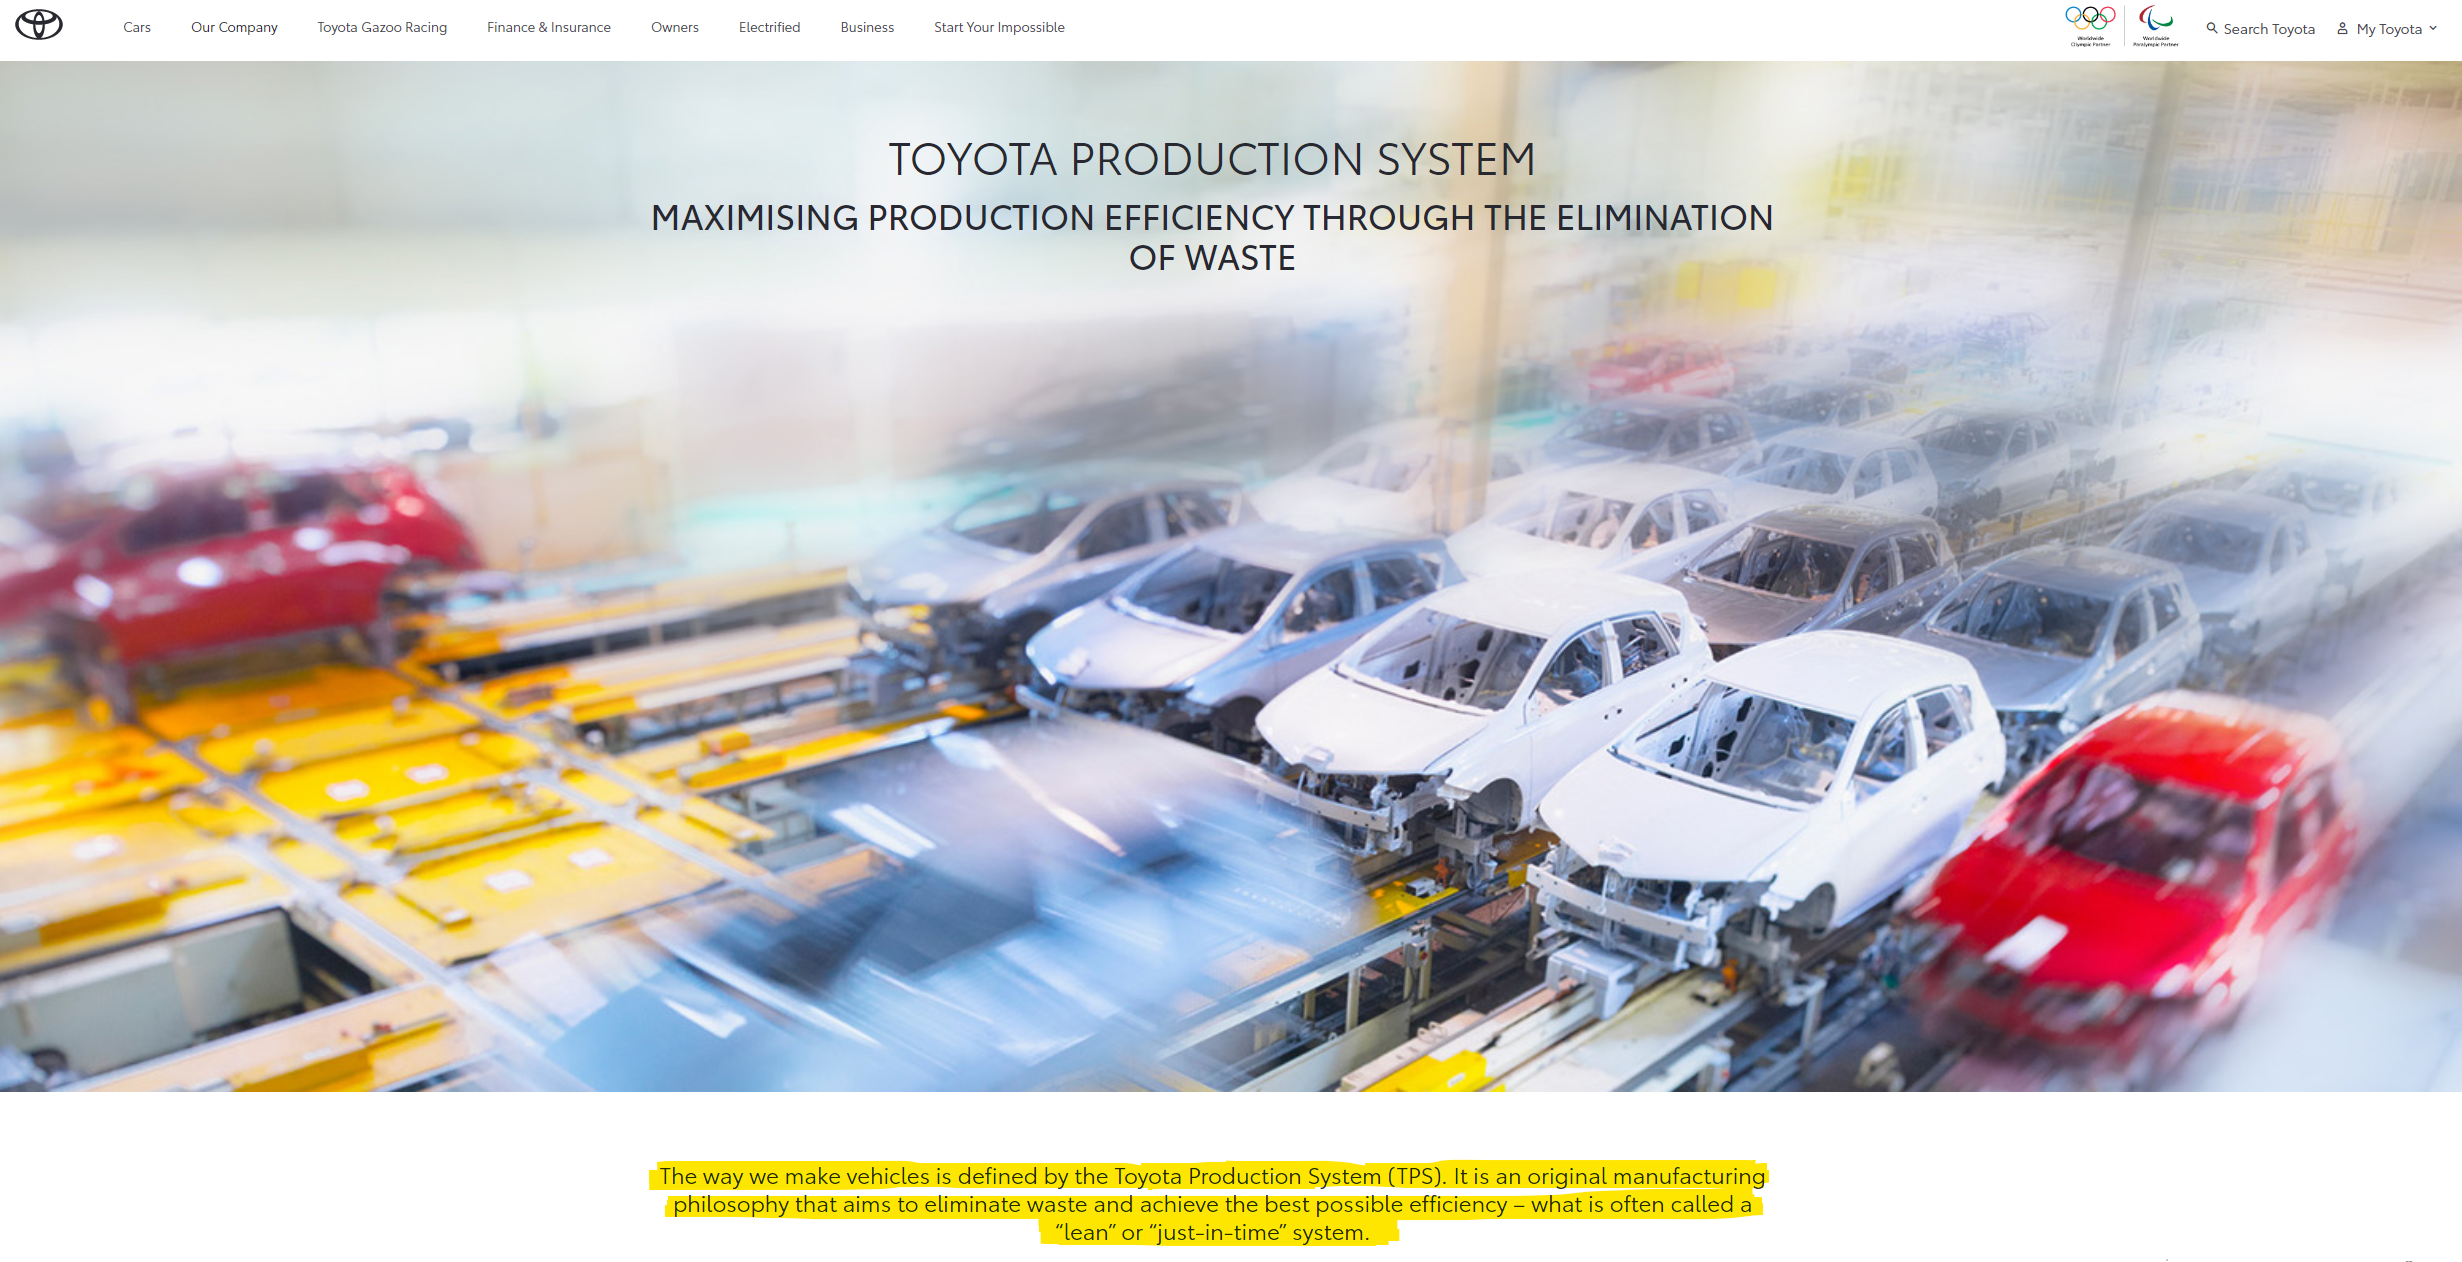 Mass producing cars is Toyota's thing.